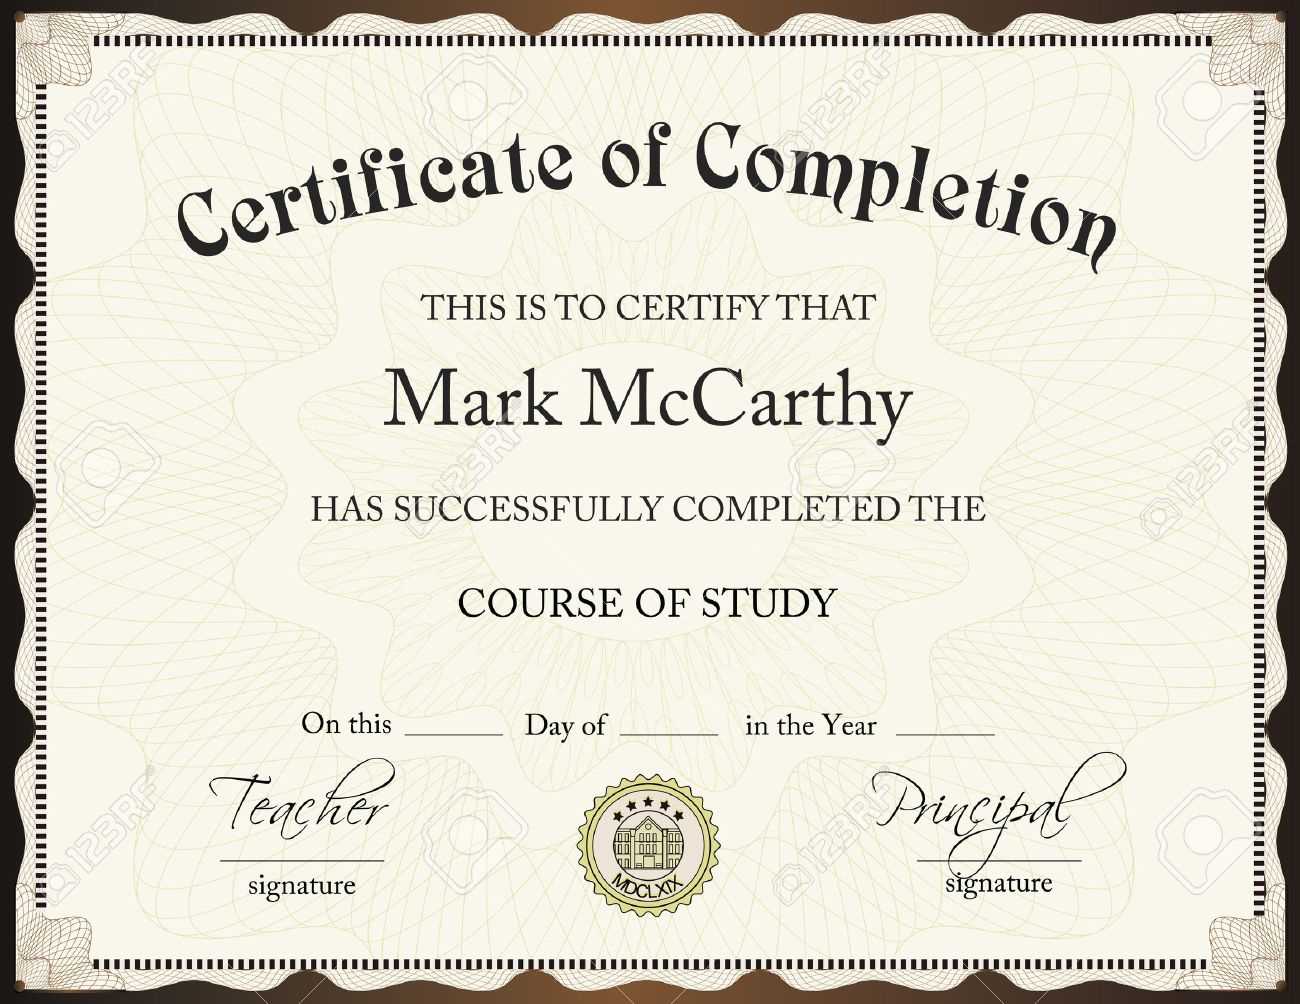 Certificate Of Completion Template With Blank Certificate Of Achievement Template